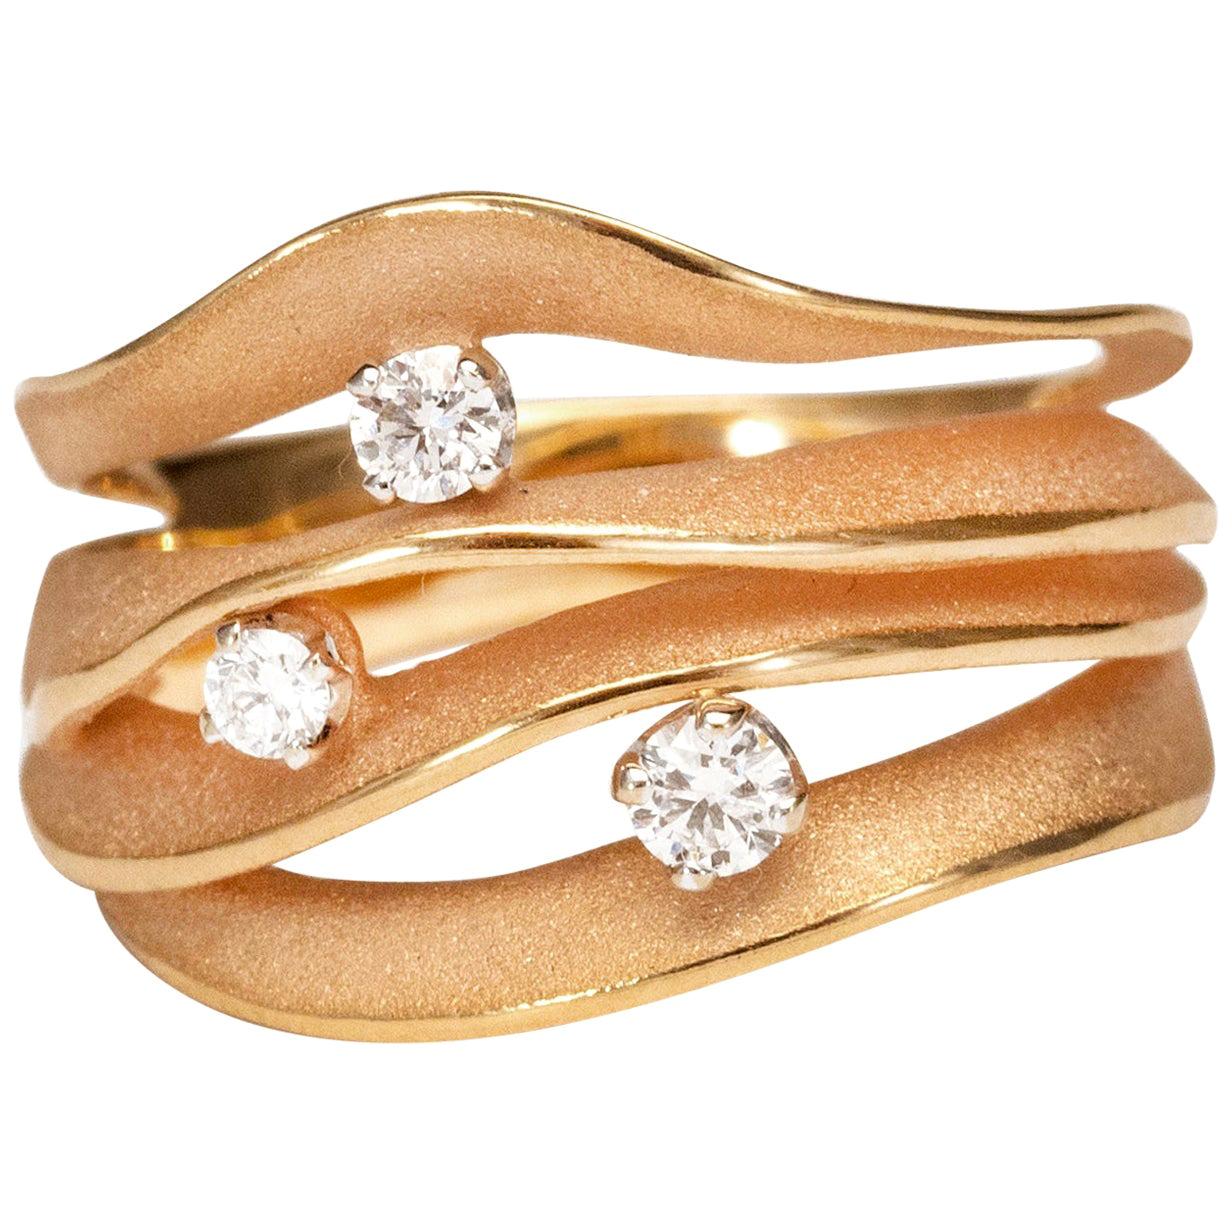 For Sale:  Annamaria Cammilli "Dune Royal" Ring with Diamonds in 18 Karat Champagne Gold